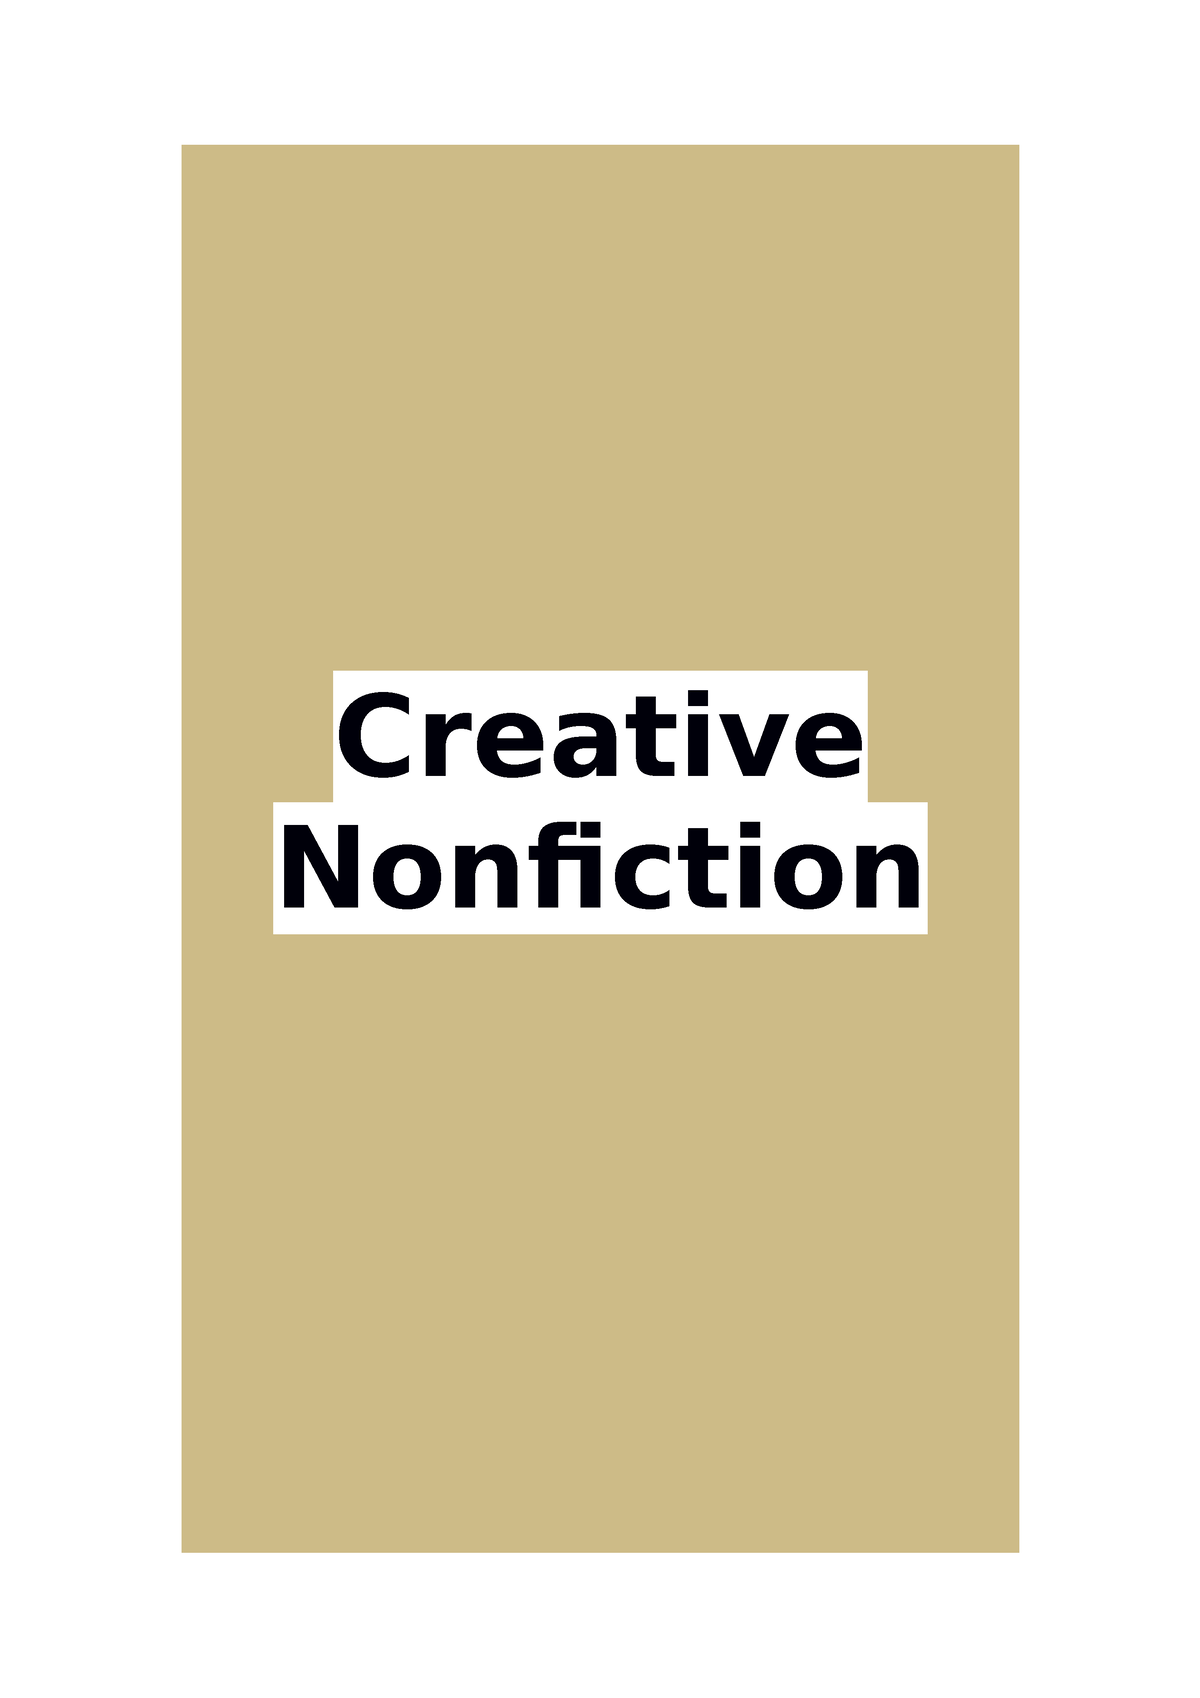 creative nonfiction essay submissions